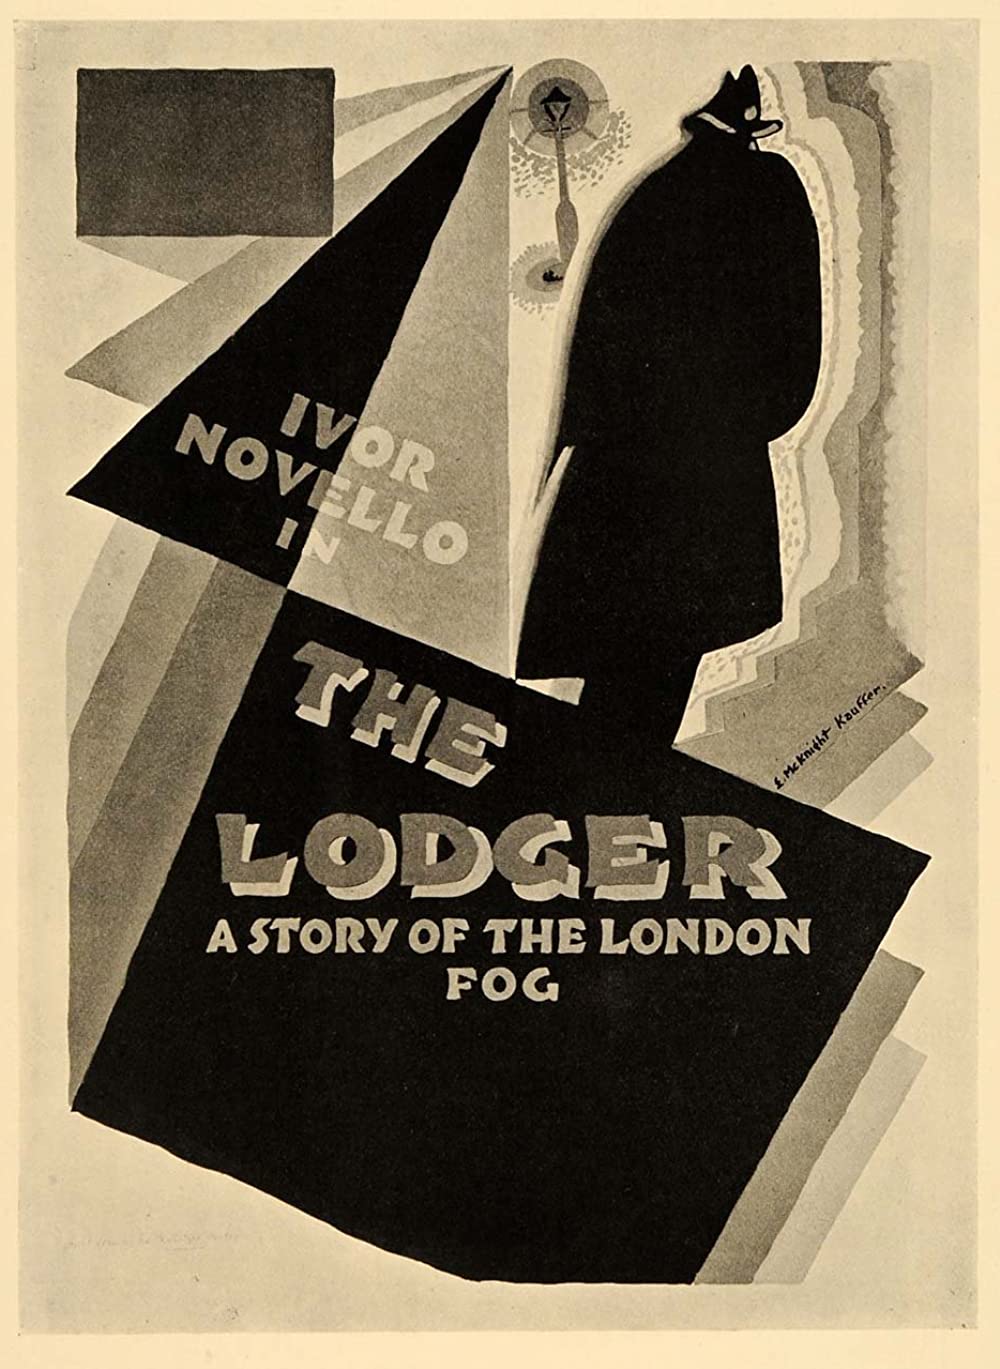 The Lodger - A Story of the London Fog